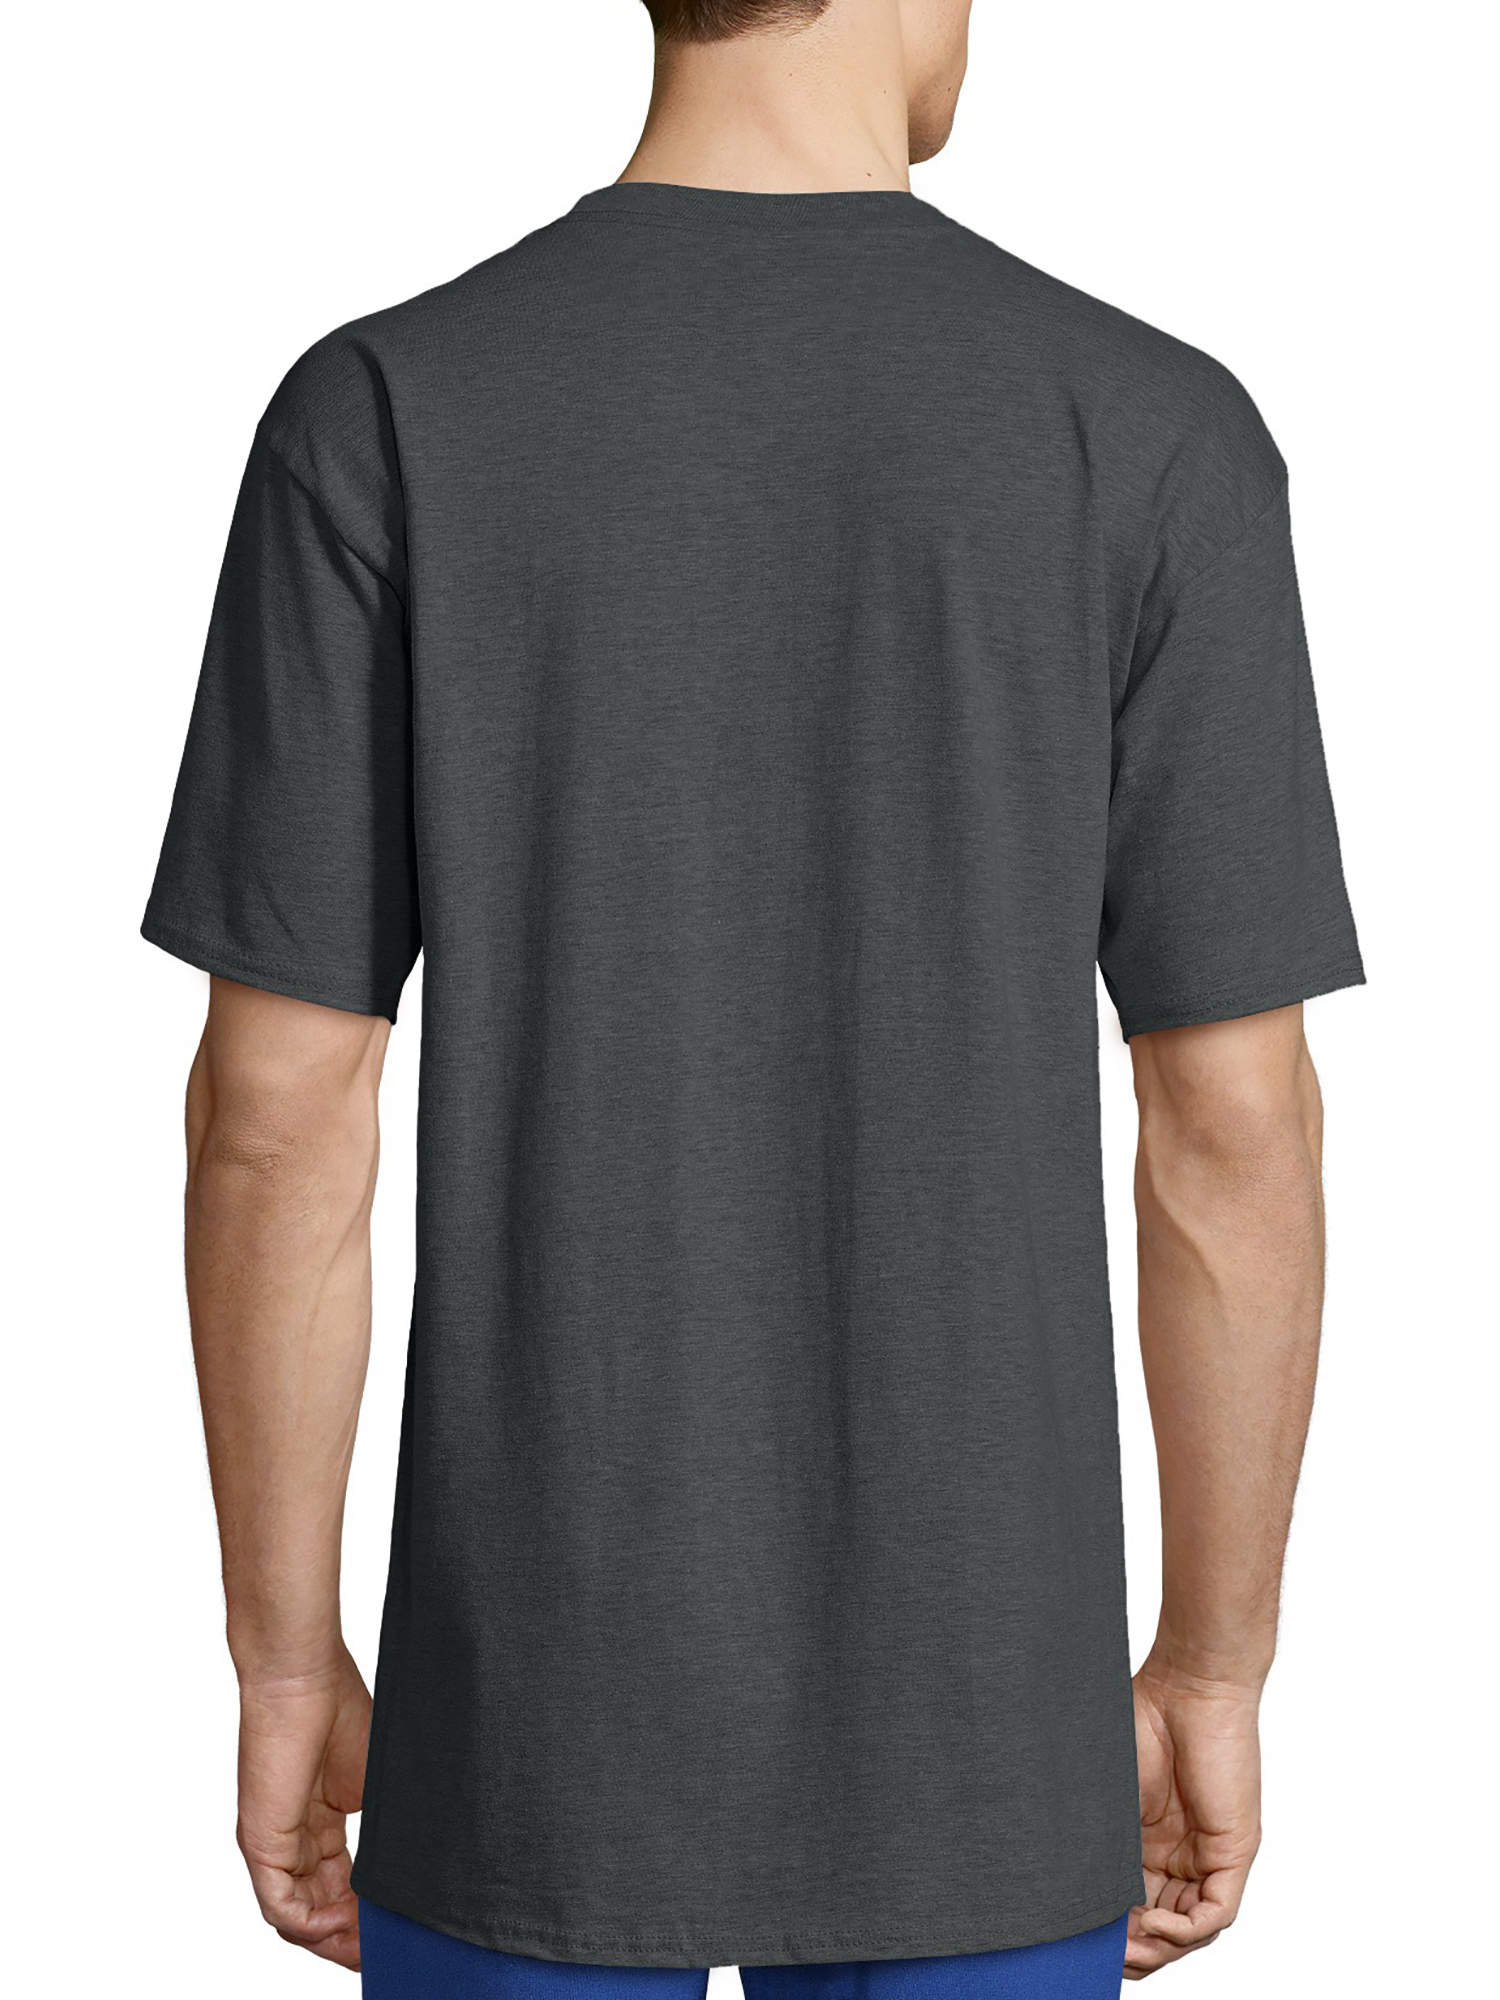 Hanes Big Men's Beefy Heavyweight Short Sleeve T-shirt - Tall Sizes, Up To Size 4XT - image 3 of 7